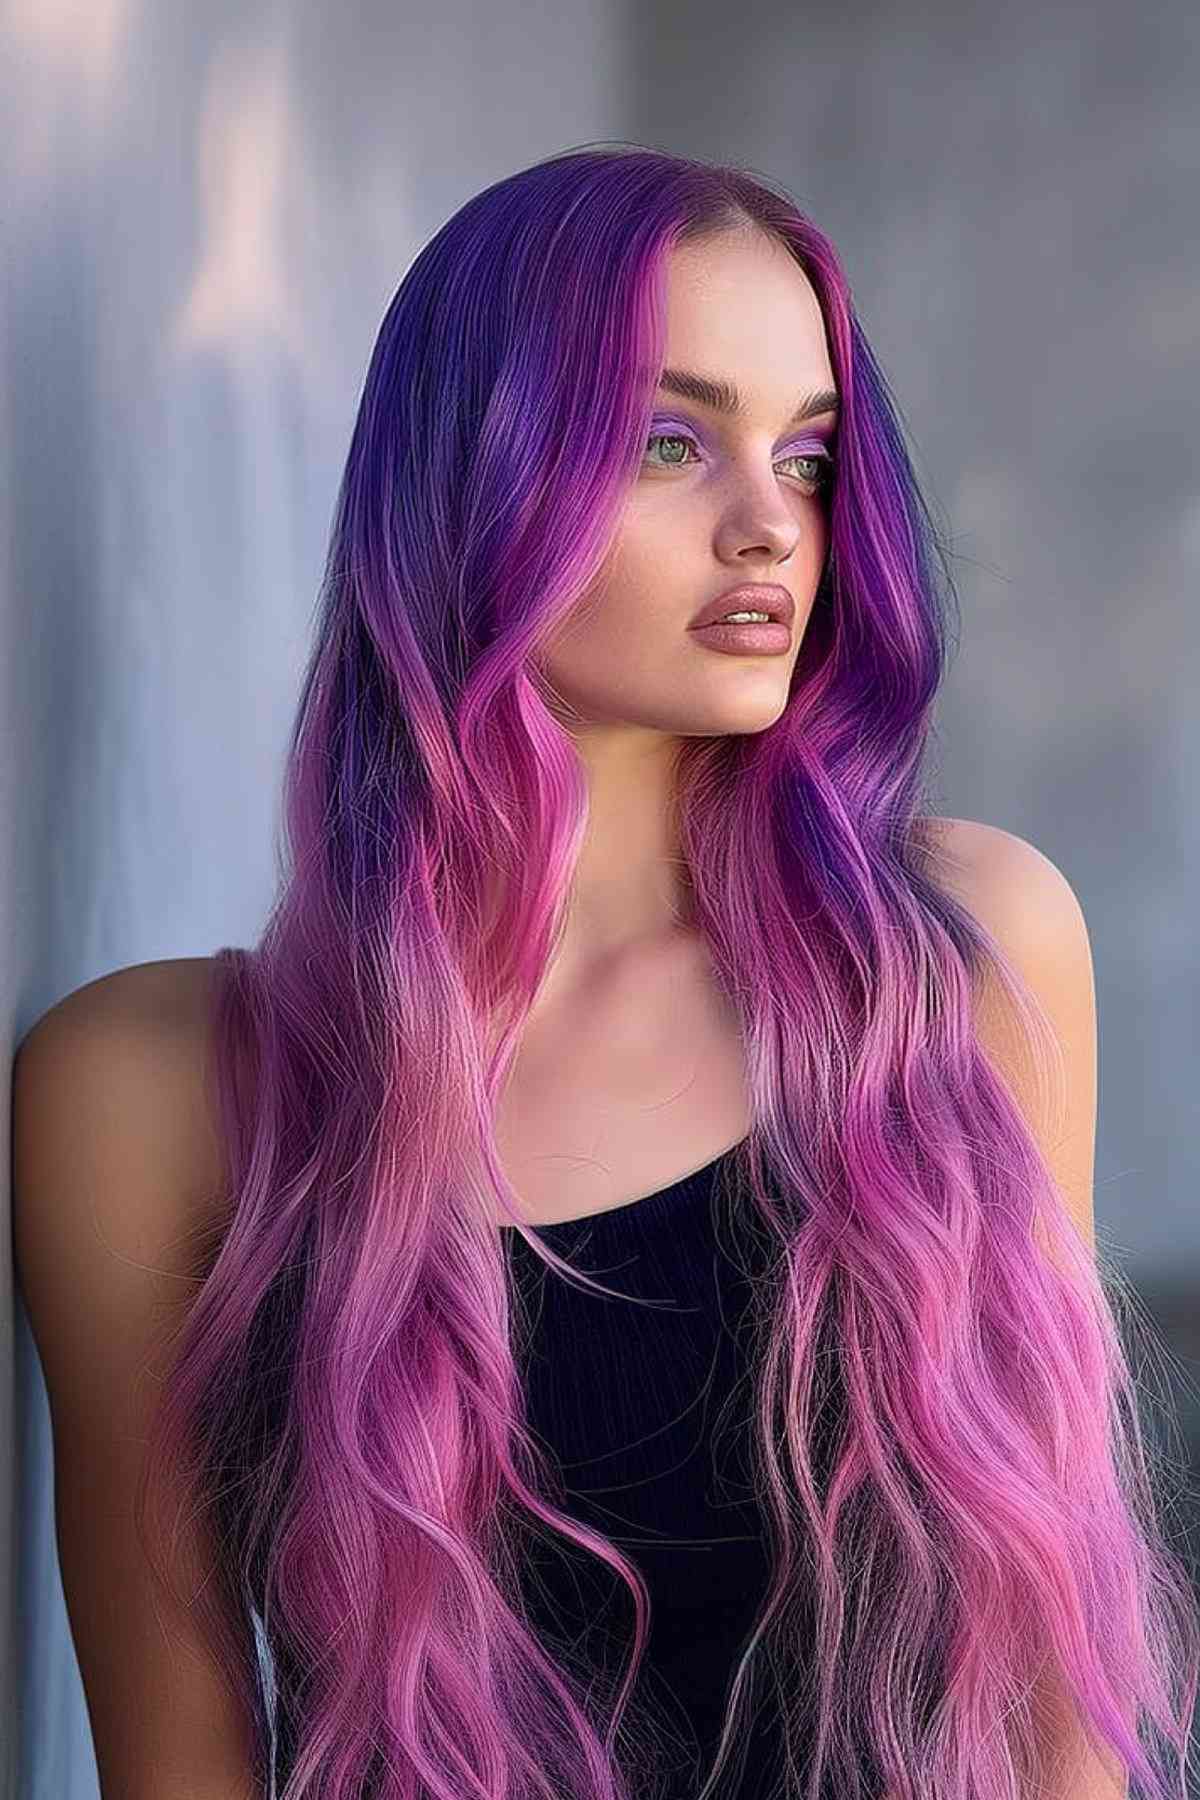 Long Wavy Hair with Gemini-Inspired Purple to Pink Gradient